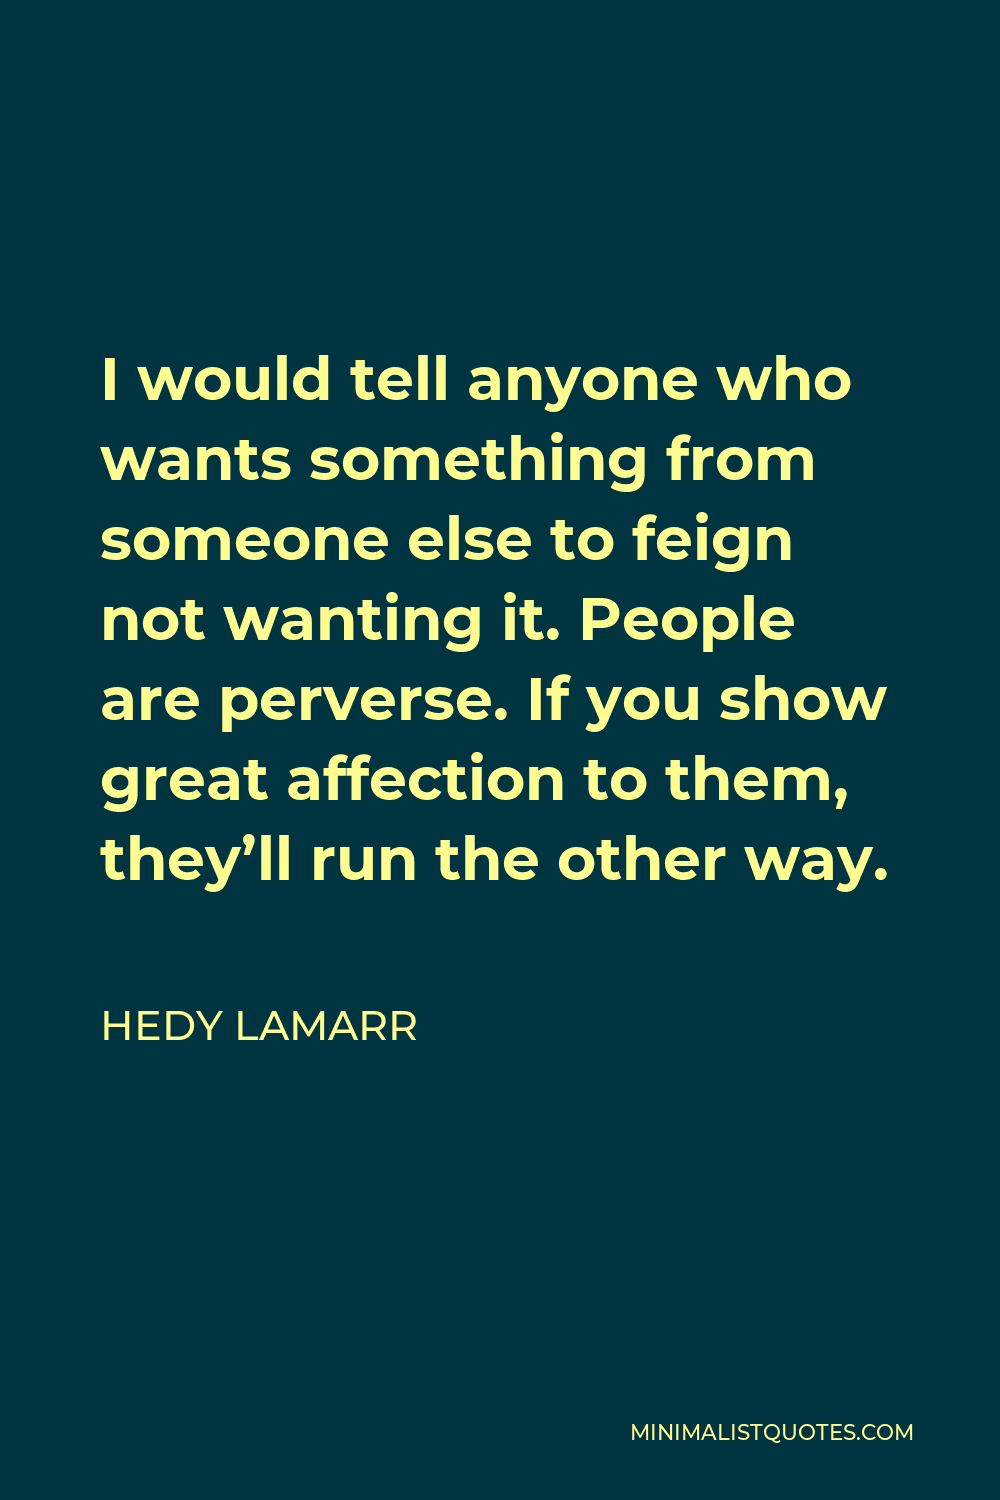 Hedy Lamarr Quote: I would tell anyone who wants something from someone ...